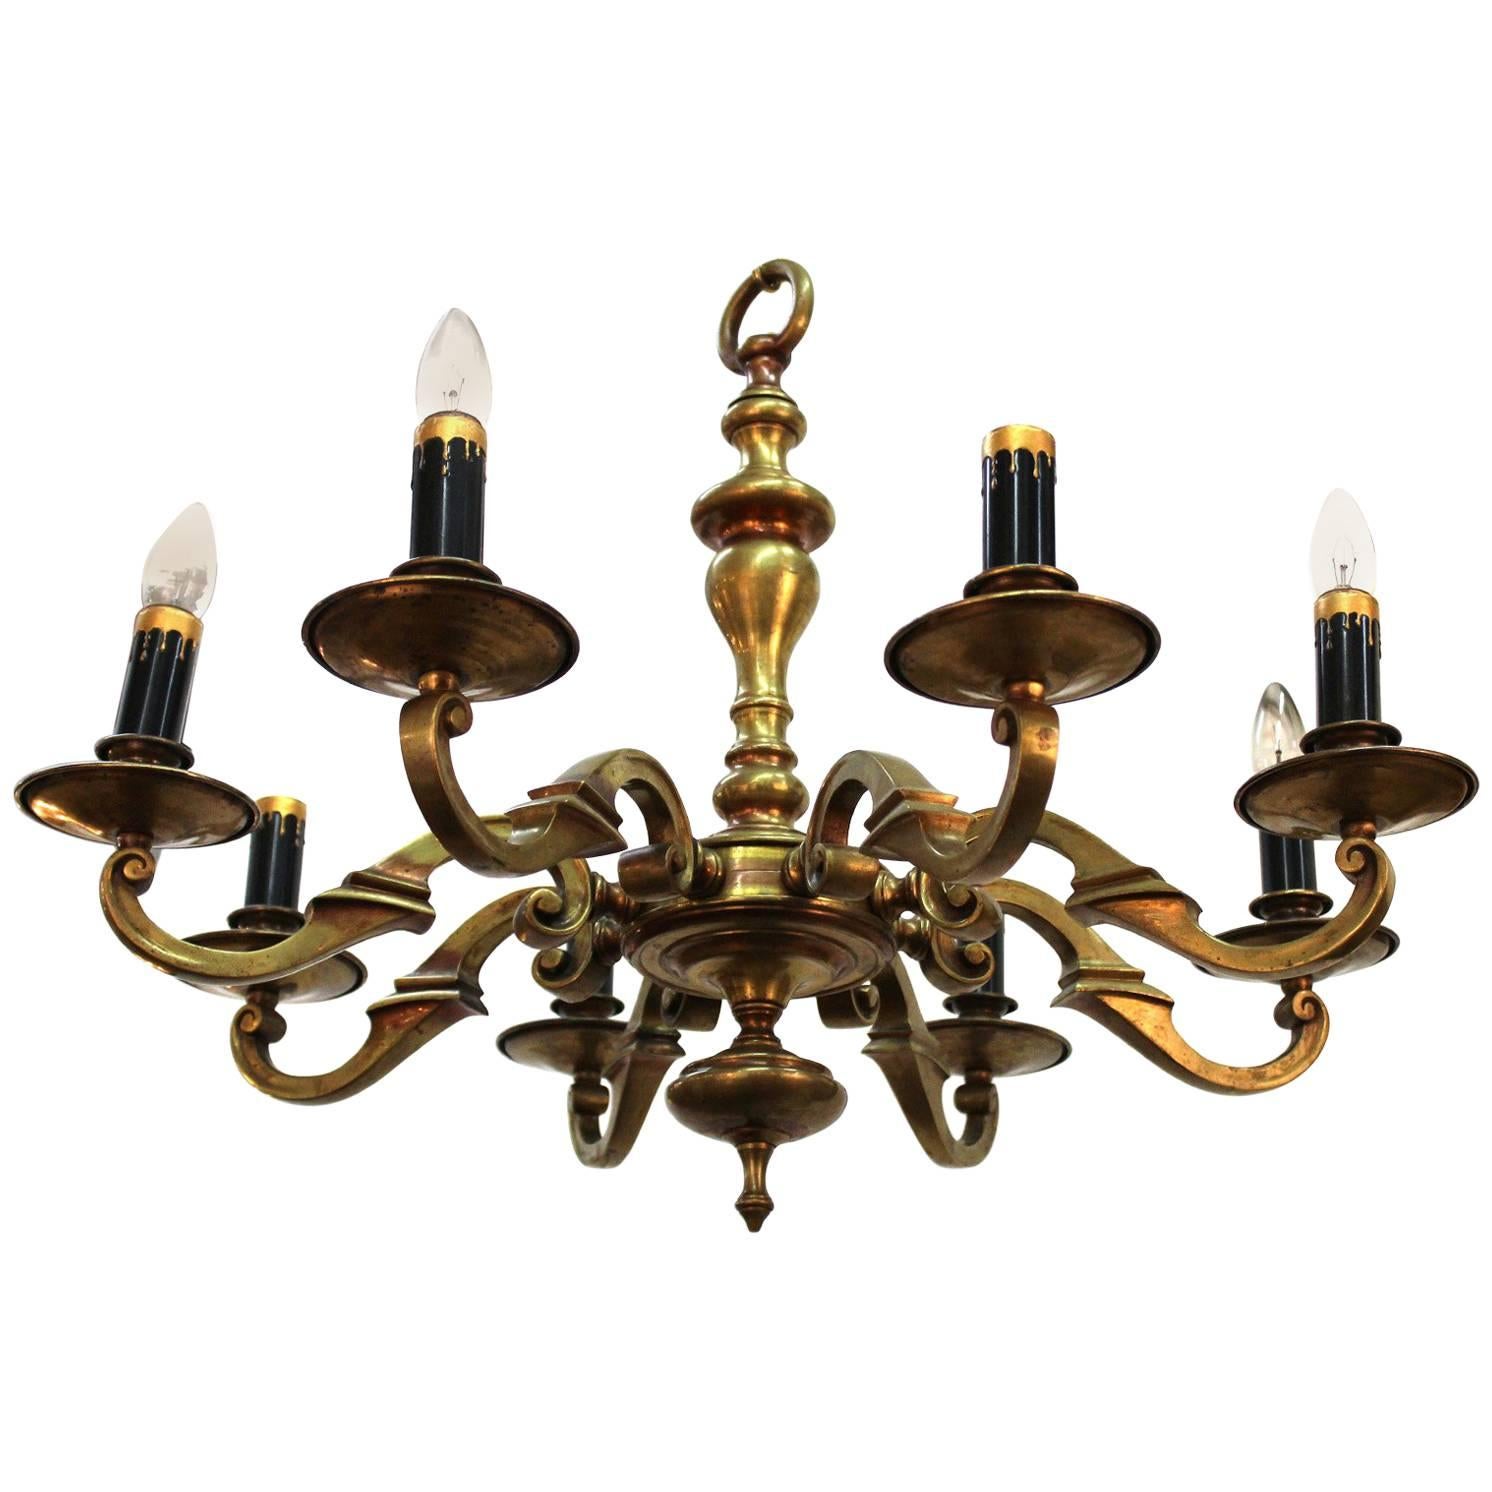 An early 1900s heavy eight-arm brass chandelier from the Arts & Crafts movement. Recently rewired to US standards. All original, takes medium base bulbs.